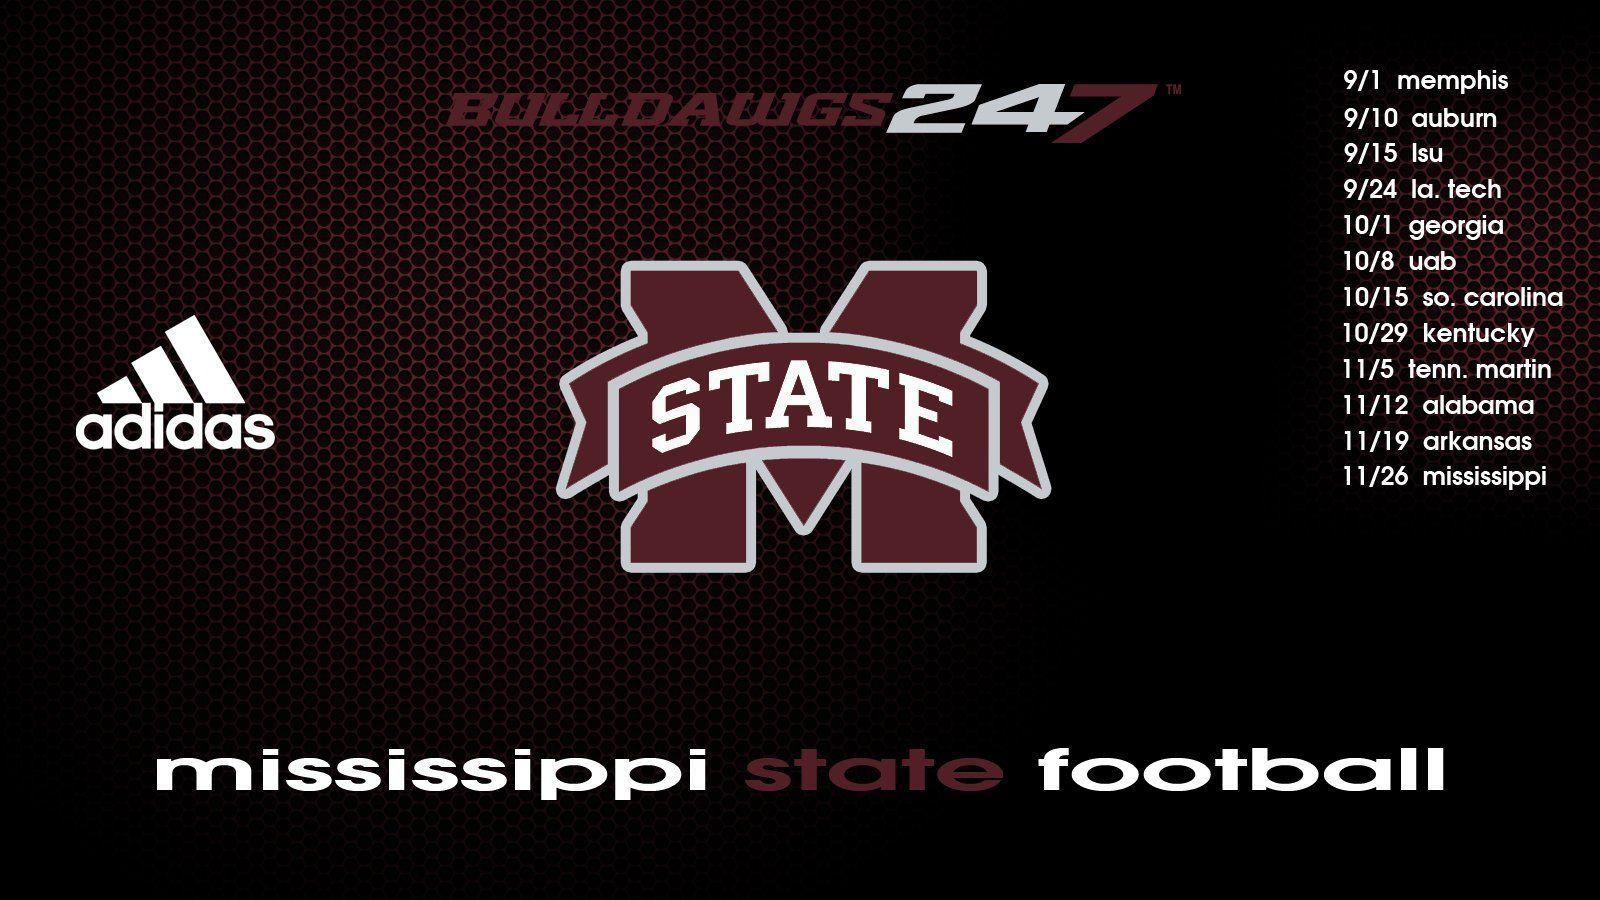 Sched Logo - MState Sched WP with 247 logo 1600x900.jpg